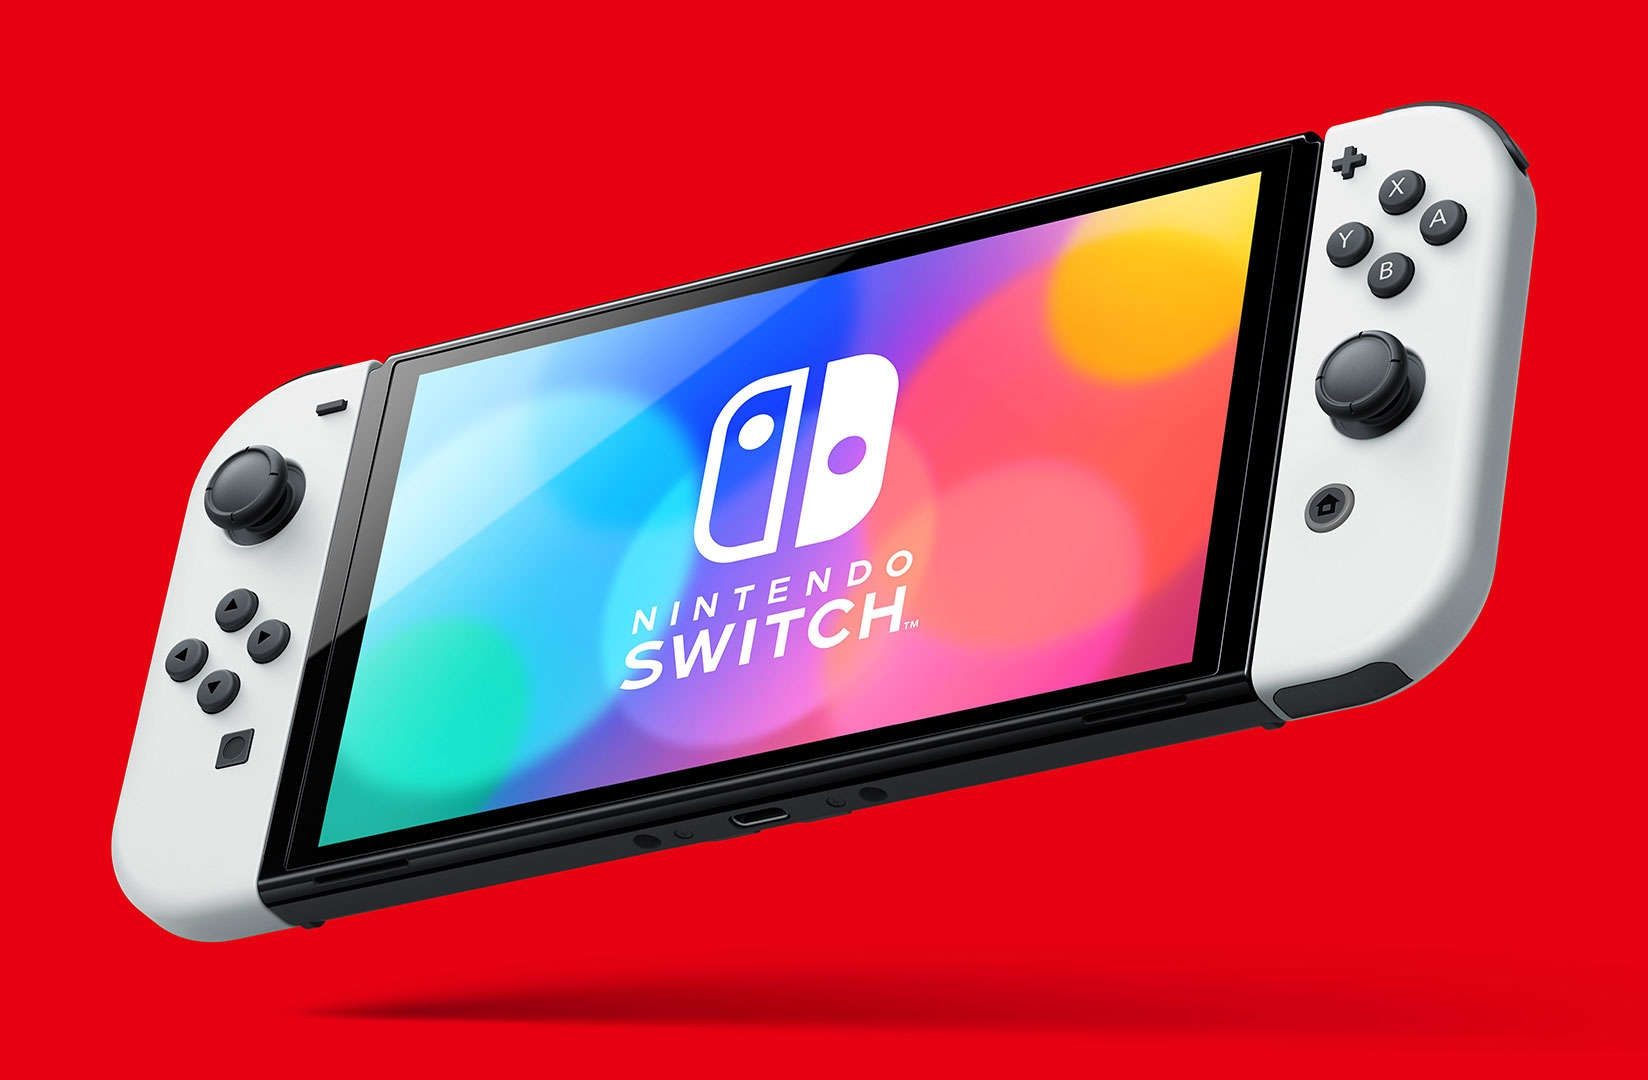 No new Nintendo Switch this year